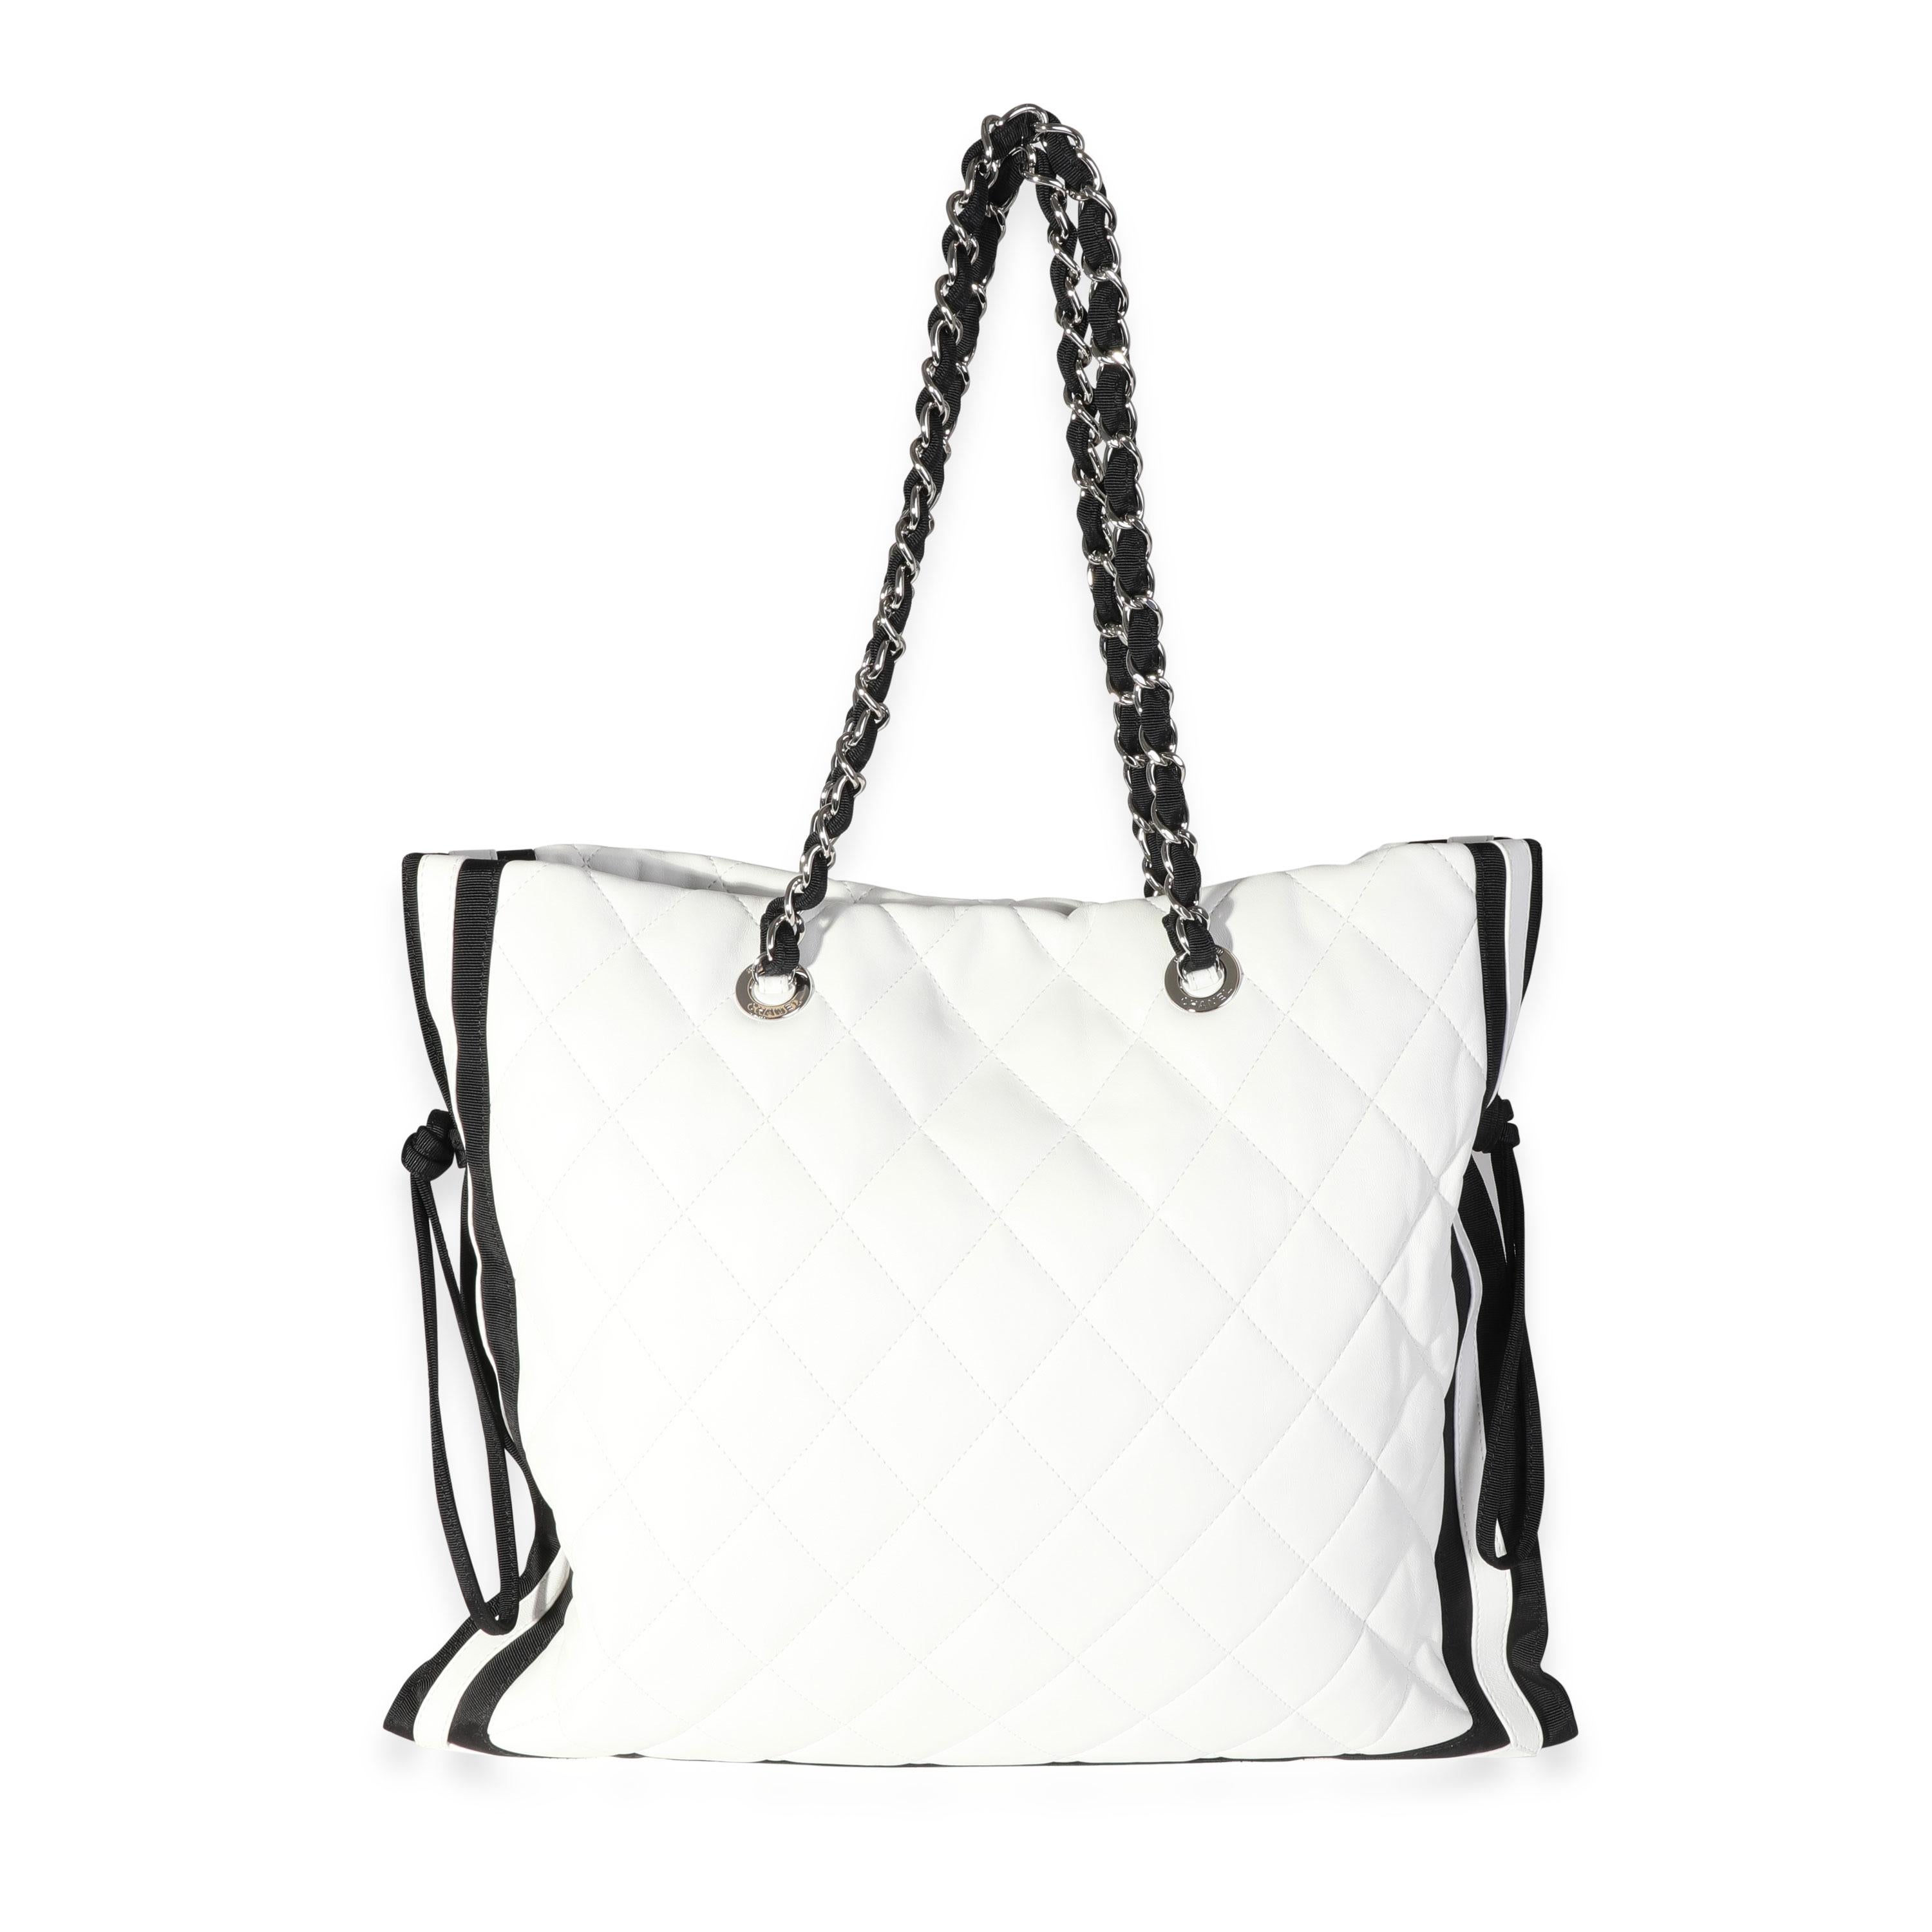 Listing Title: Chanel White Quilted Lambskin & Black Grosgrain CC Drawstring Tote
SKU: 118163
Condition: Pre-owned (3000)
Handbag Condition: Very Good
Condition Comments: Very Good Condition. Light marks throughout leather.
Brand: Chanel
Origin